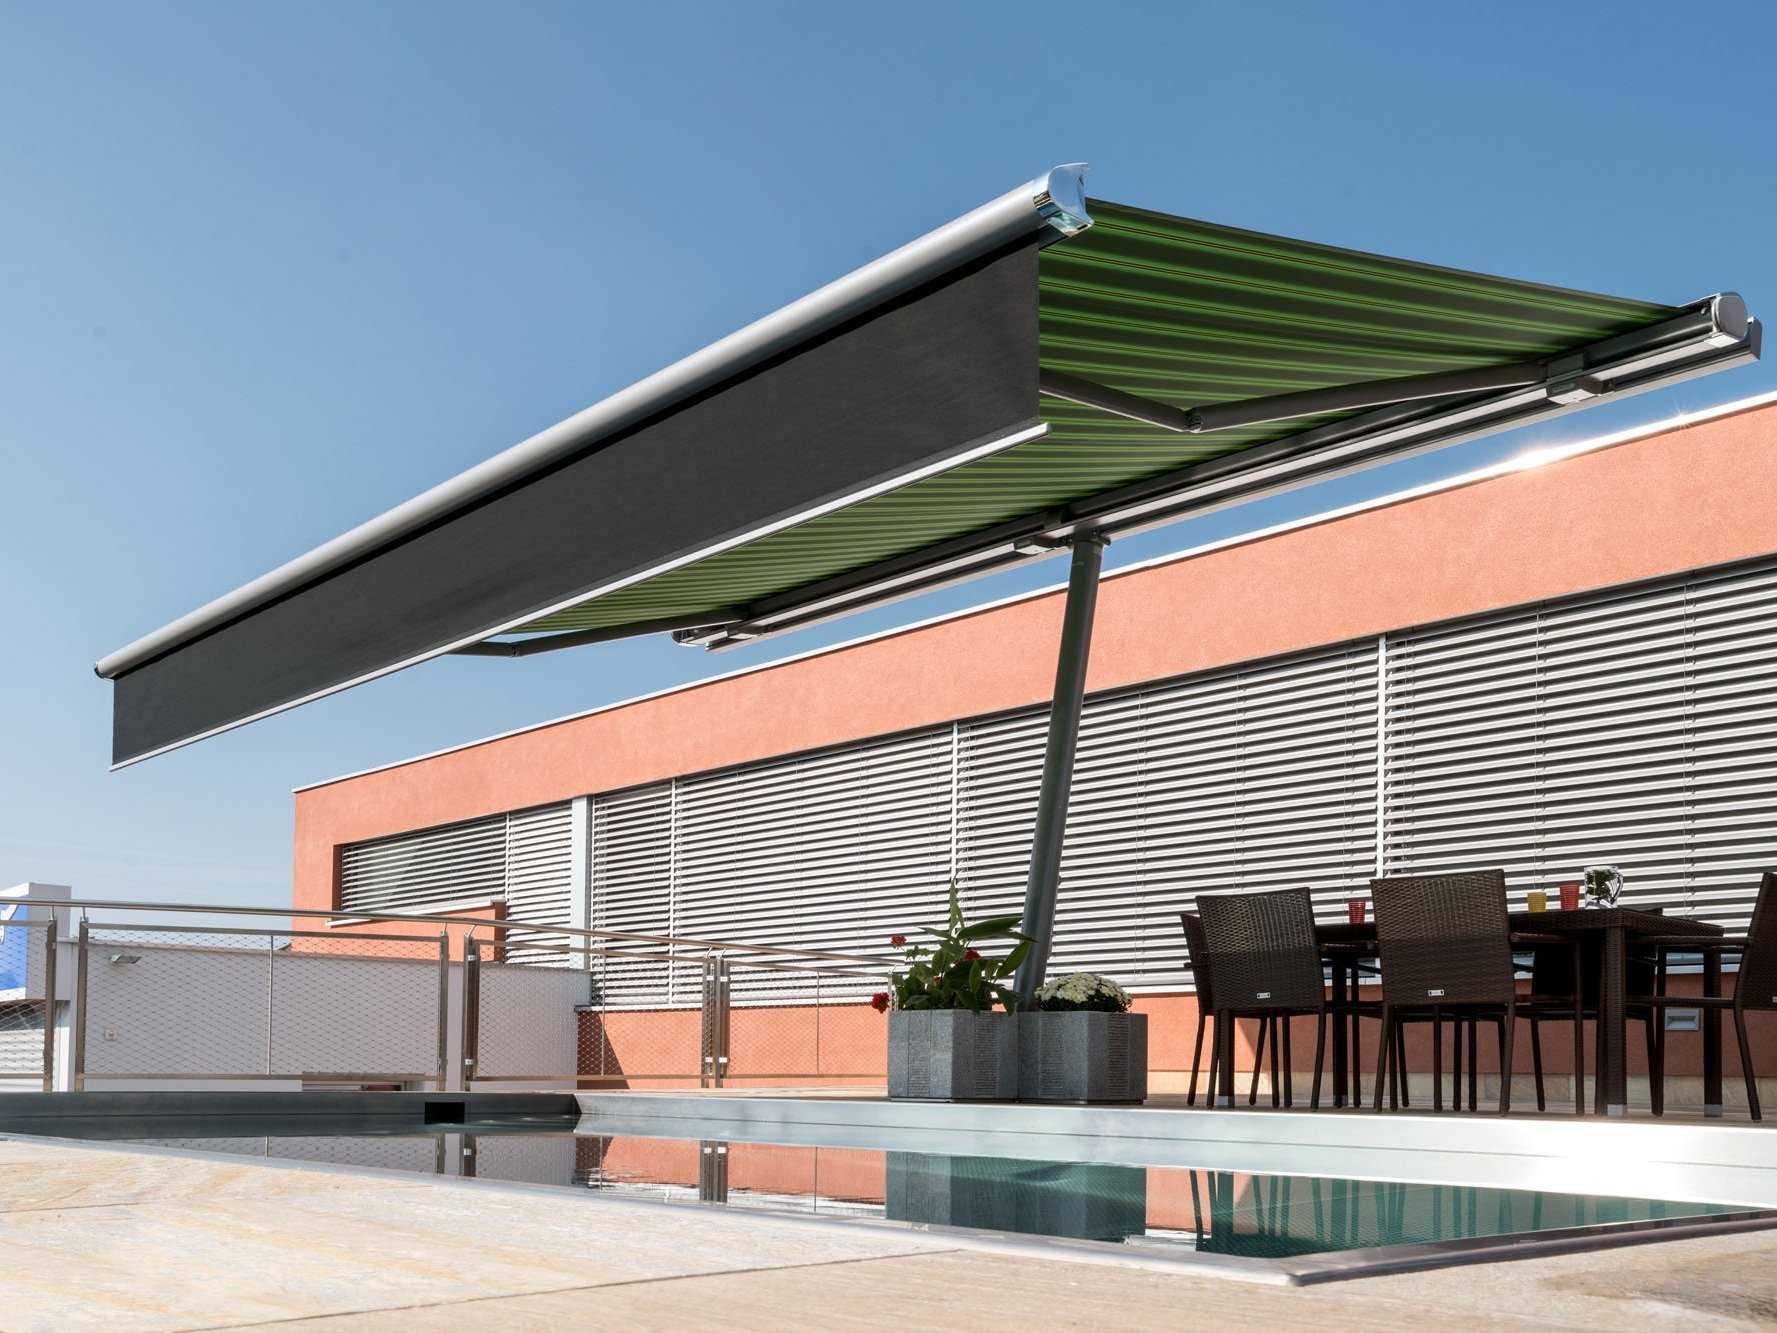 Awning+parasol+markilux+planet+with+green+striped+fabric+cover+and+black+shadeplus+by+a+pool..jpg